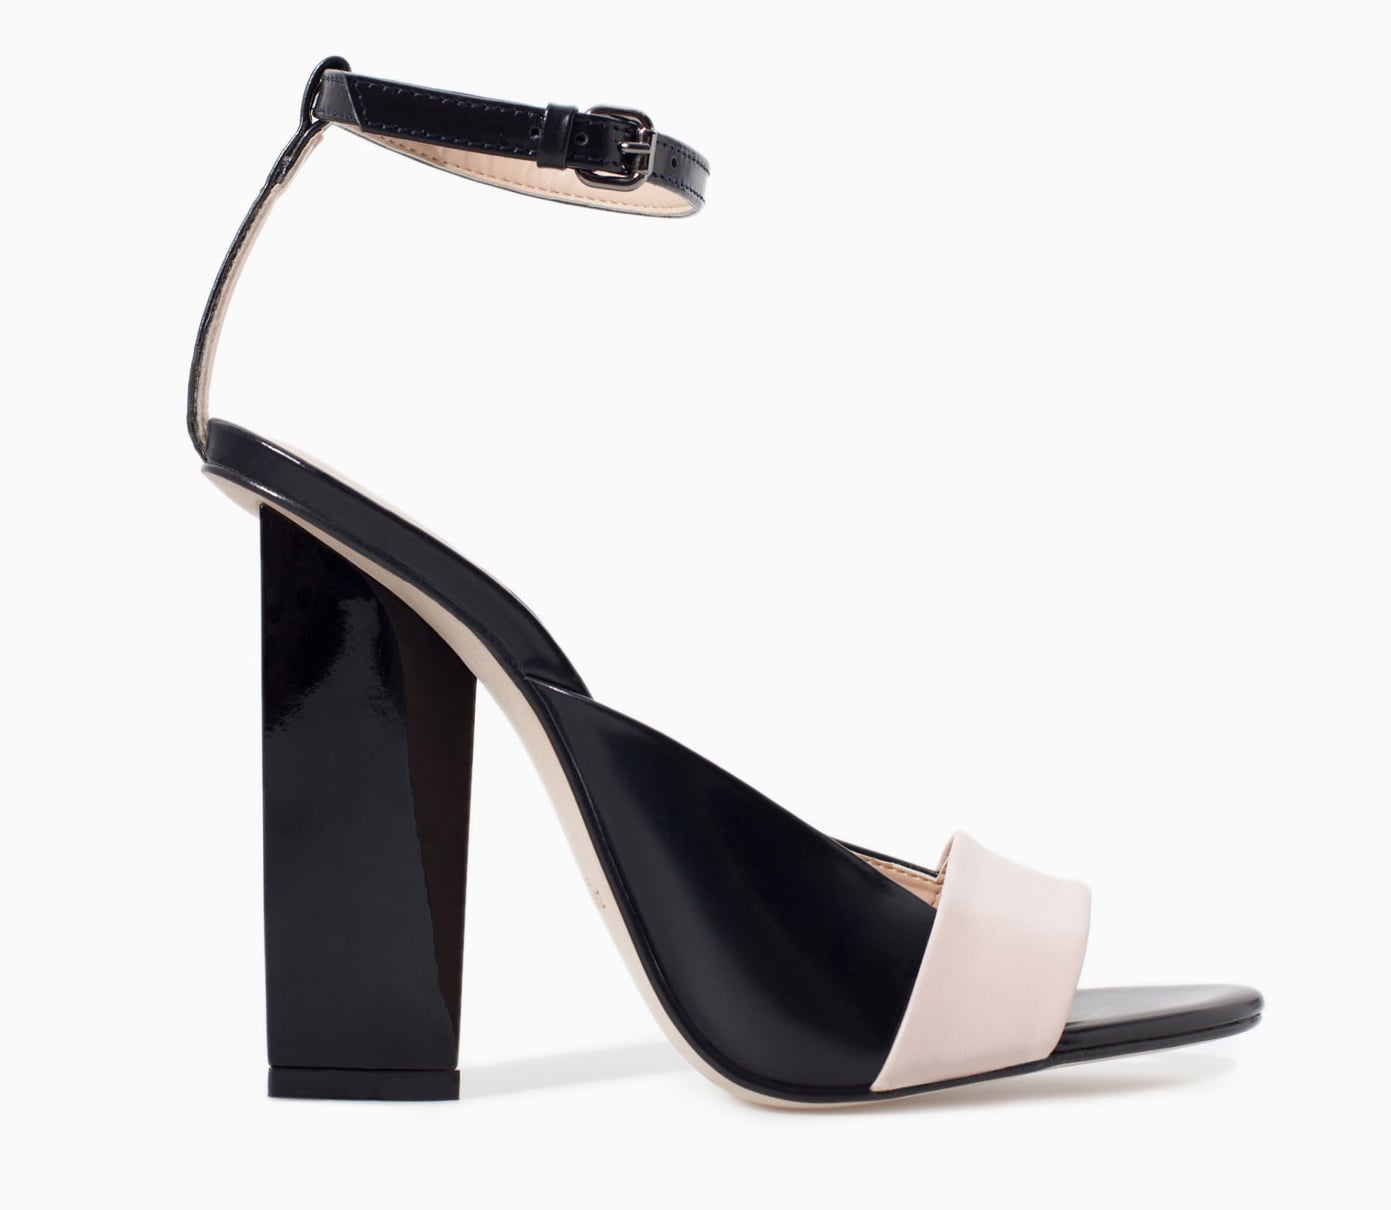 consumptie Toepassing bouwen Zara geometric blush and black ankle-strap heels ($100) | 12 Shoes You NEED  to See at Zara | POPSUGAR Fashion Photo 7